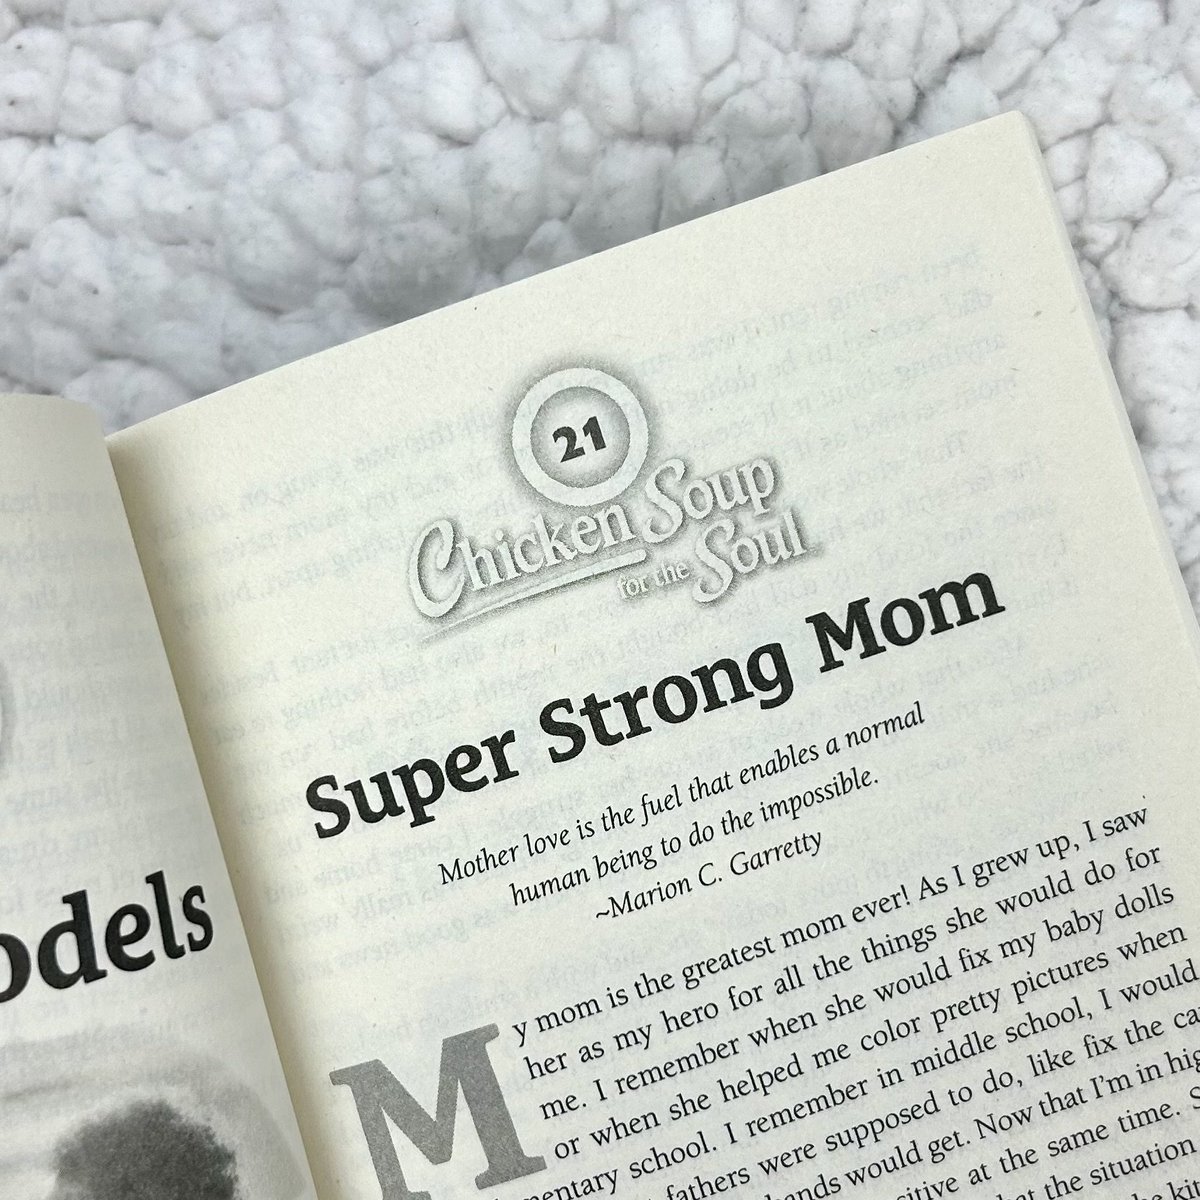 There’s no strength like mom strength! Chicken Soup for the Soul: Mothers & Daughters is available now wherever books are sold. bit.ly/43fhSw4